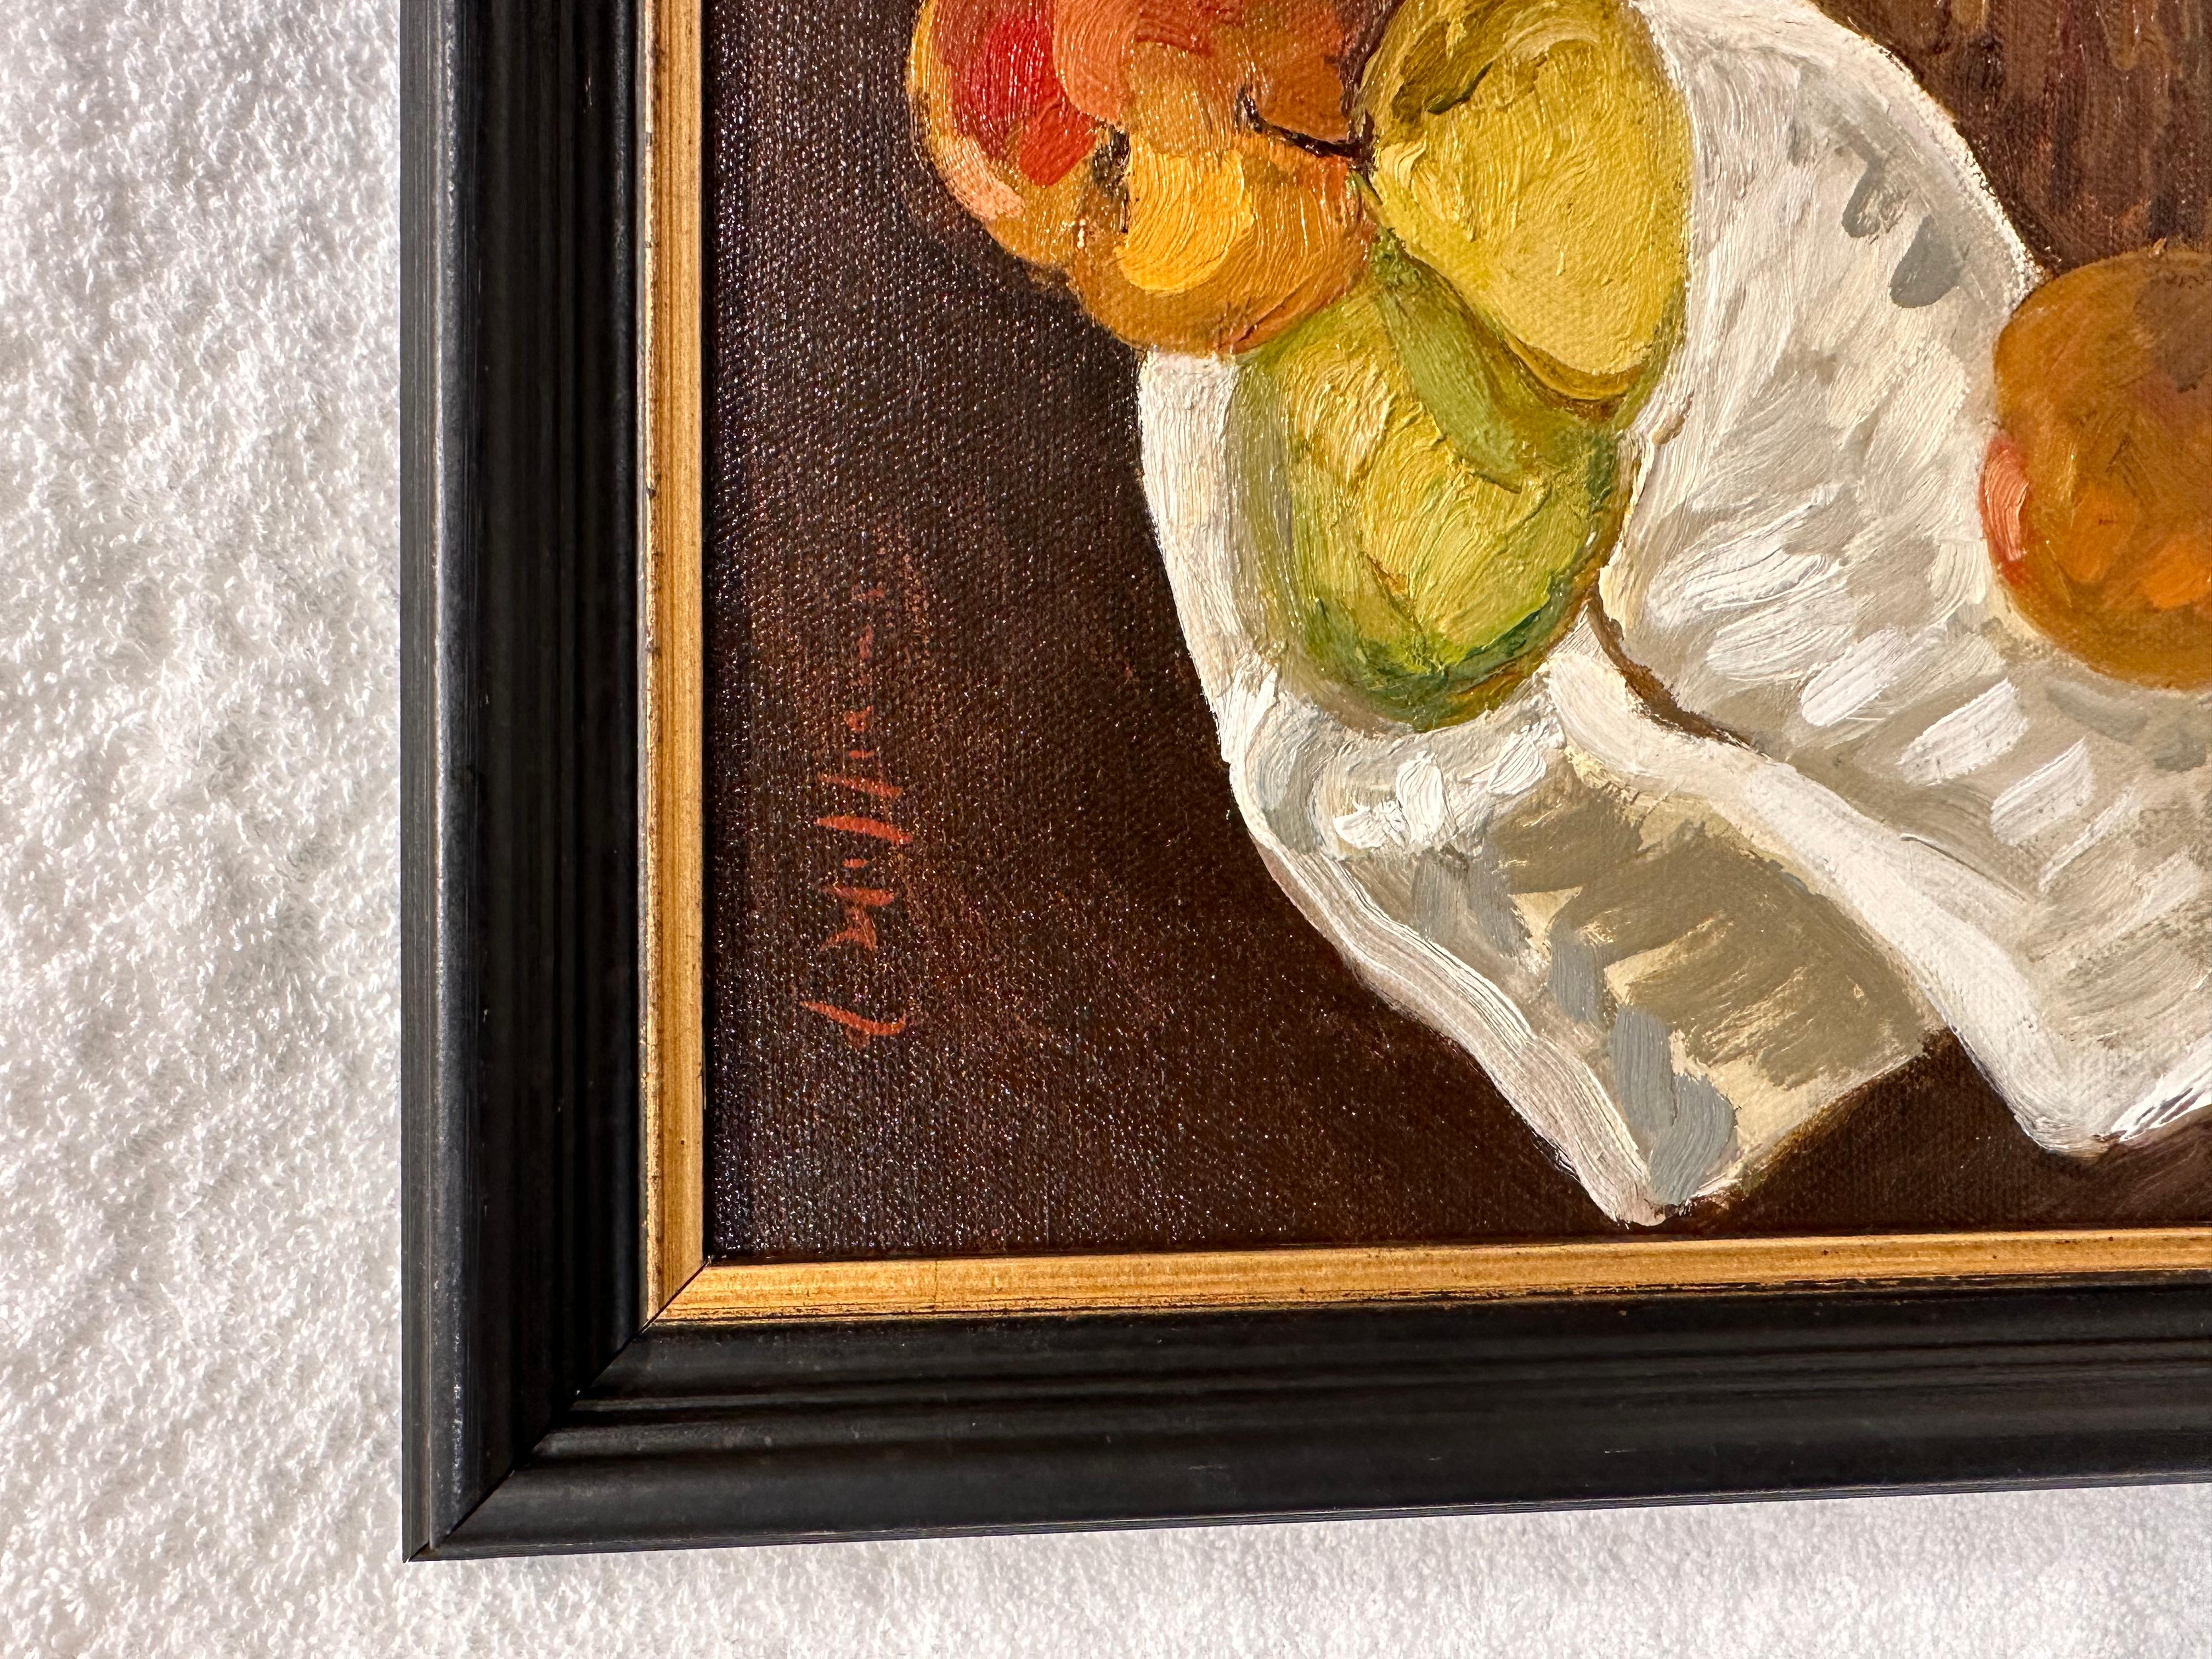 This stunning still life oil painting is a great way to add a bit of brightness to the walls of your kitchen or dining space. Fruit and vegetables have been a primary focus of some of the worlds most accomplished artists over the centuries as it